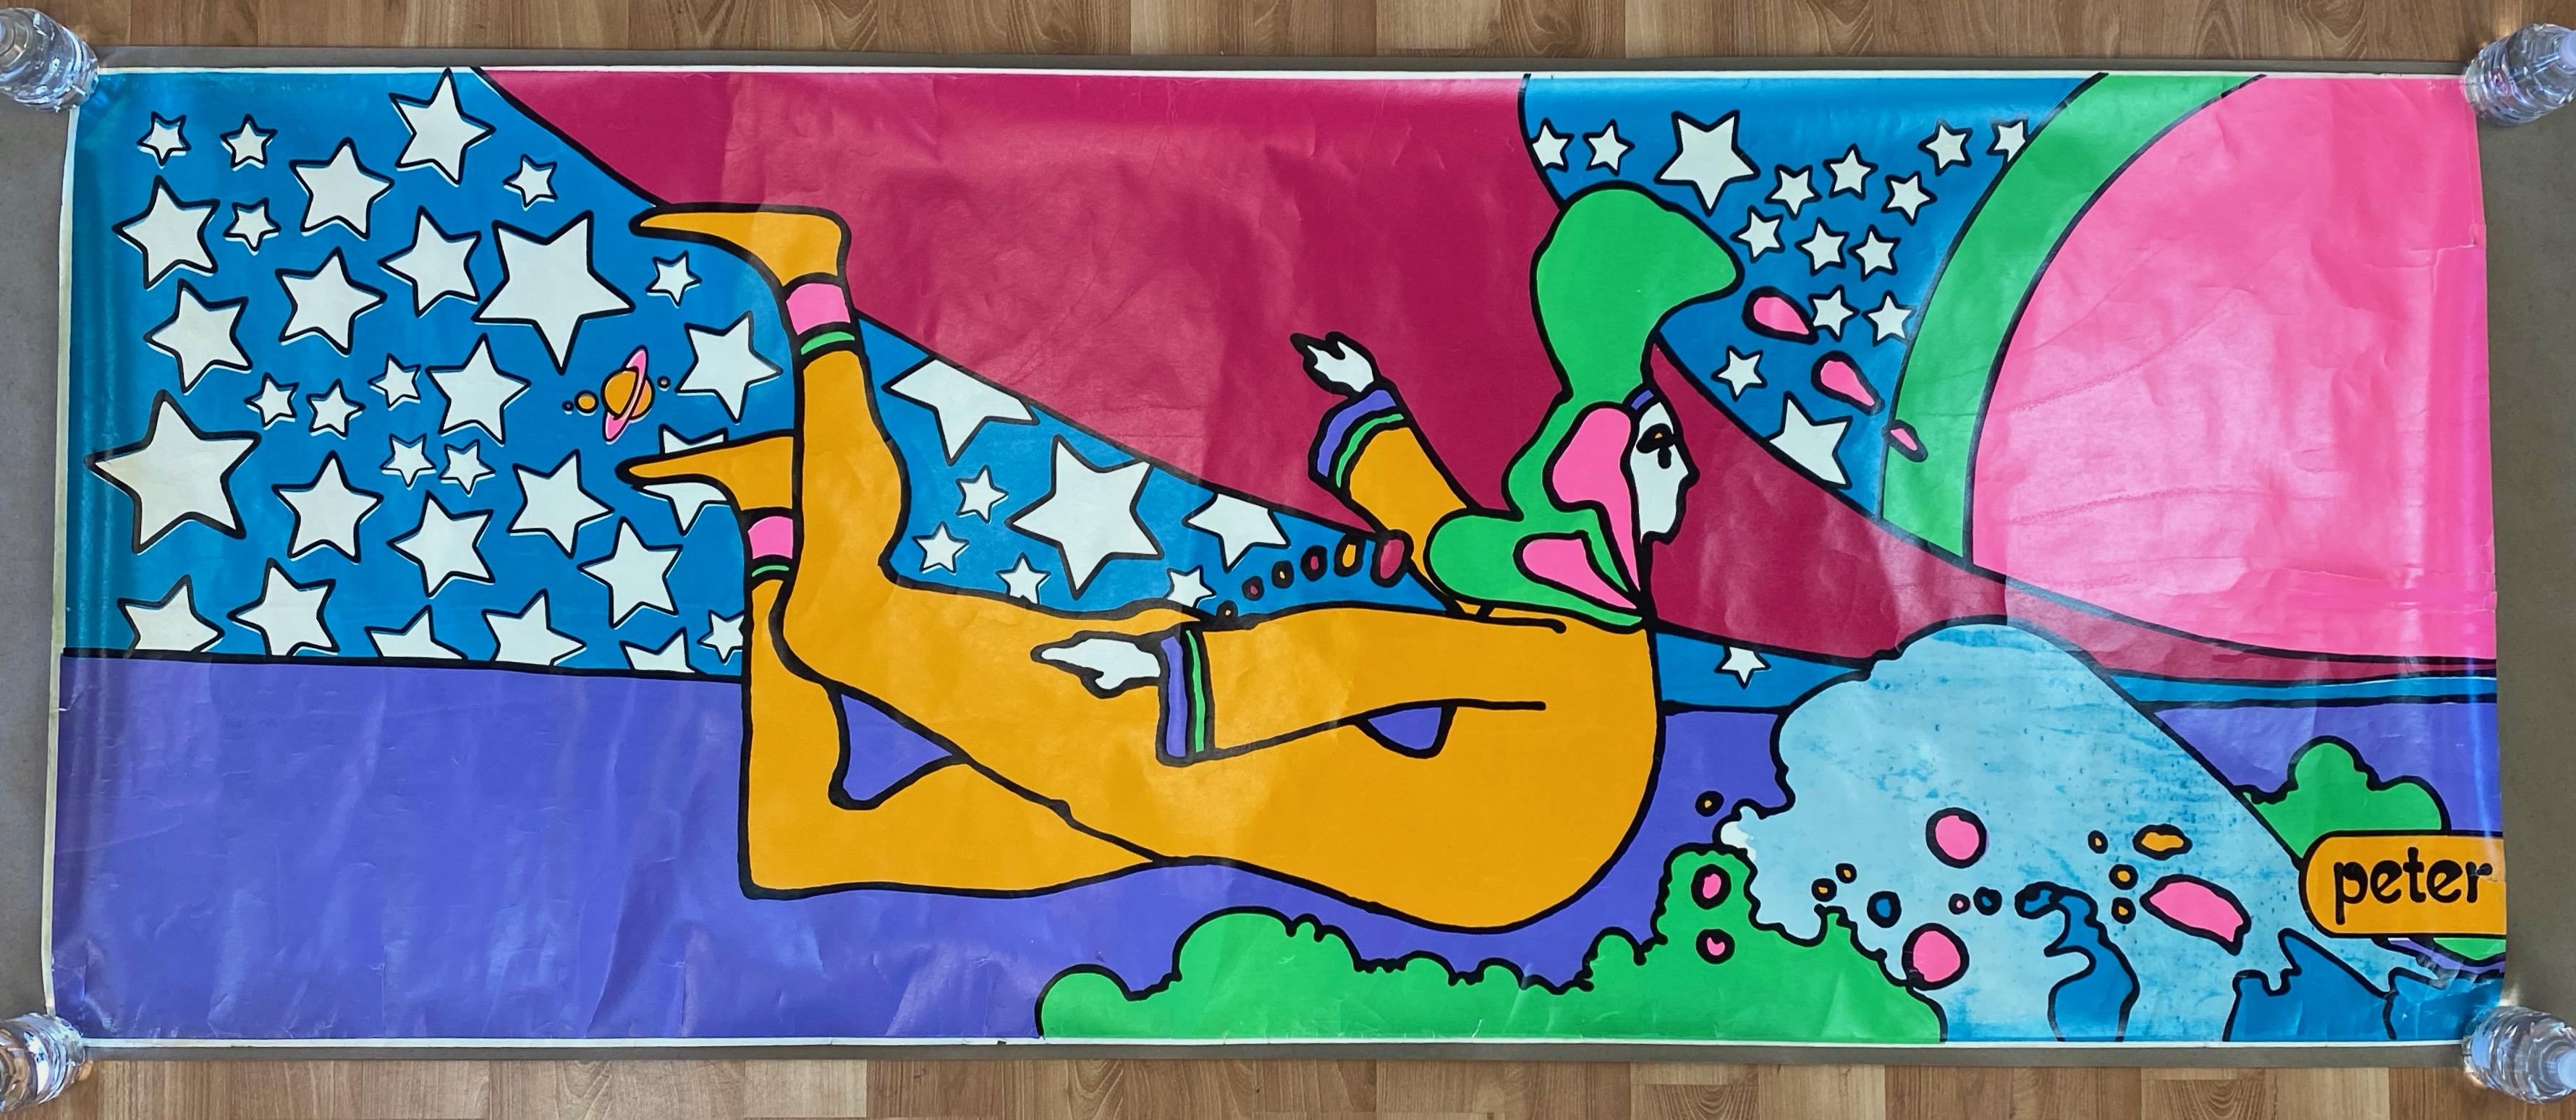 An important, monumental, and exceptionally rare twelve-foot-wide two-piece serigraph created by Peter Max (American, b. Germany, 1937) for his 1970 “The World of Peter Max” first solo museum exhibition tour.

Features the artist’s iconic “Cosmic